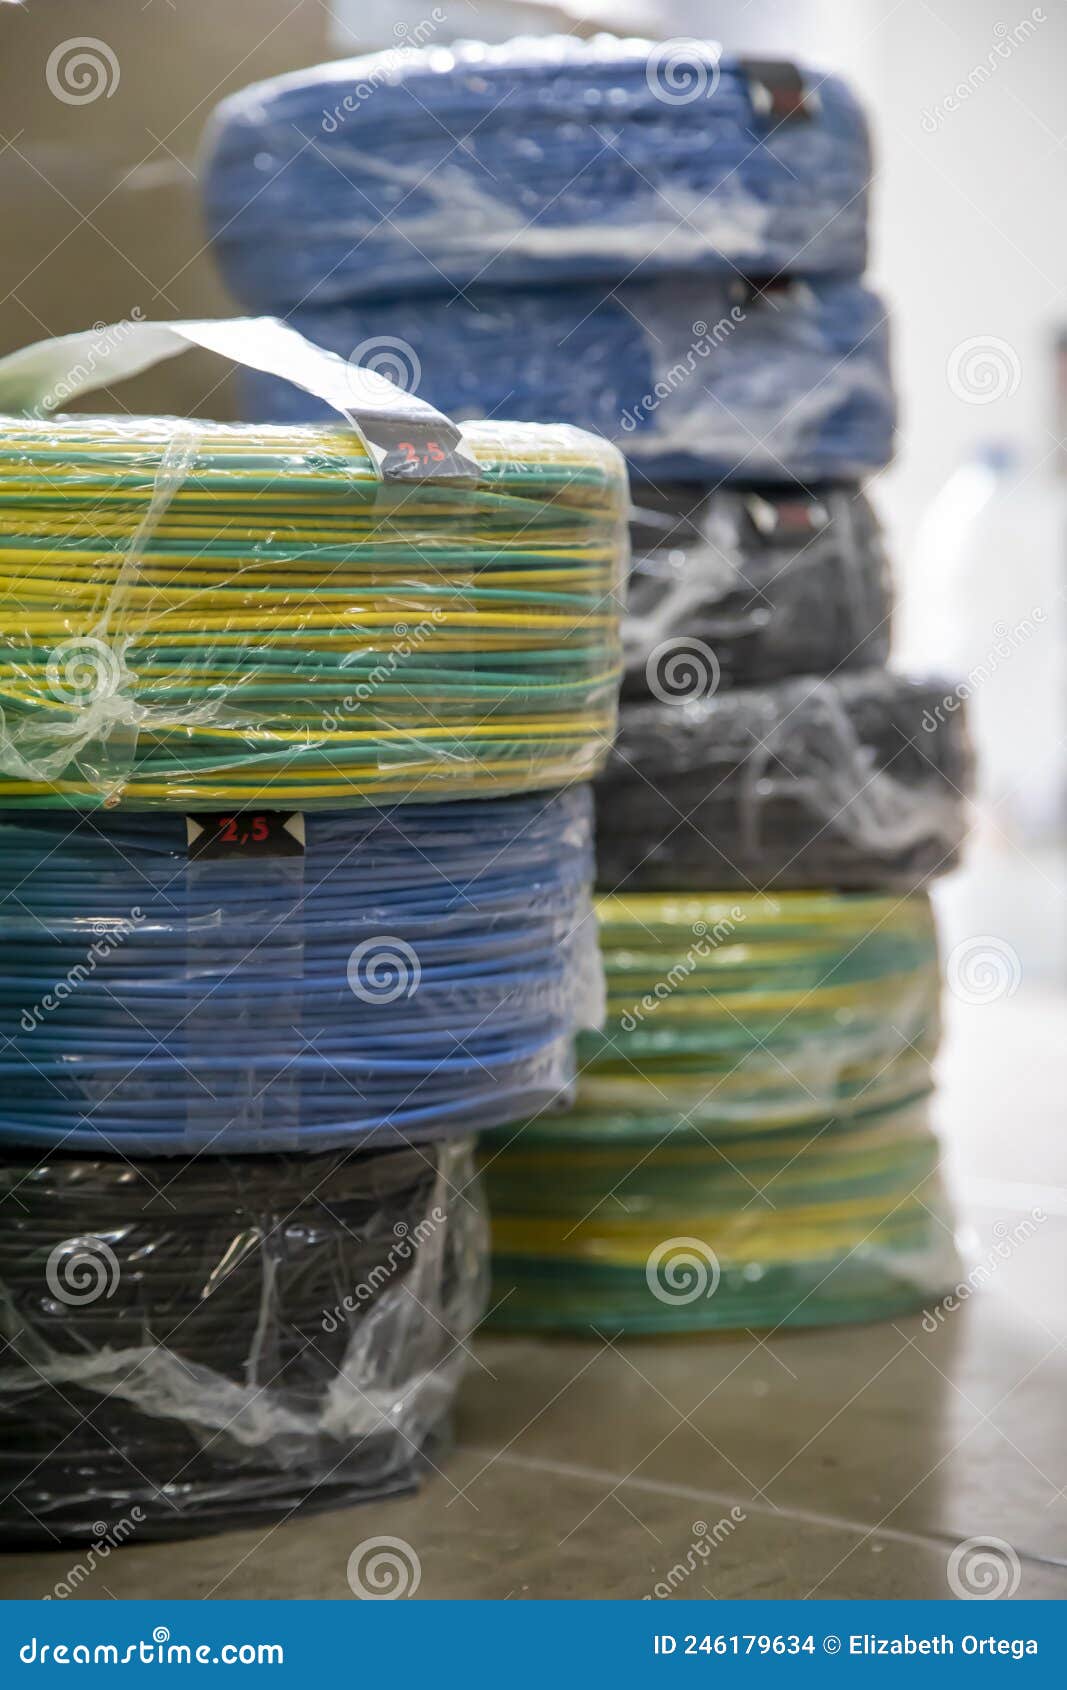 coils of electrical cable of various colors on the floor